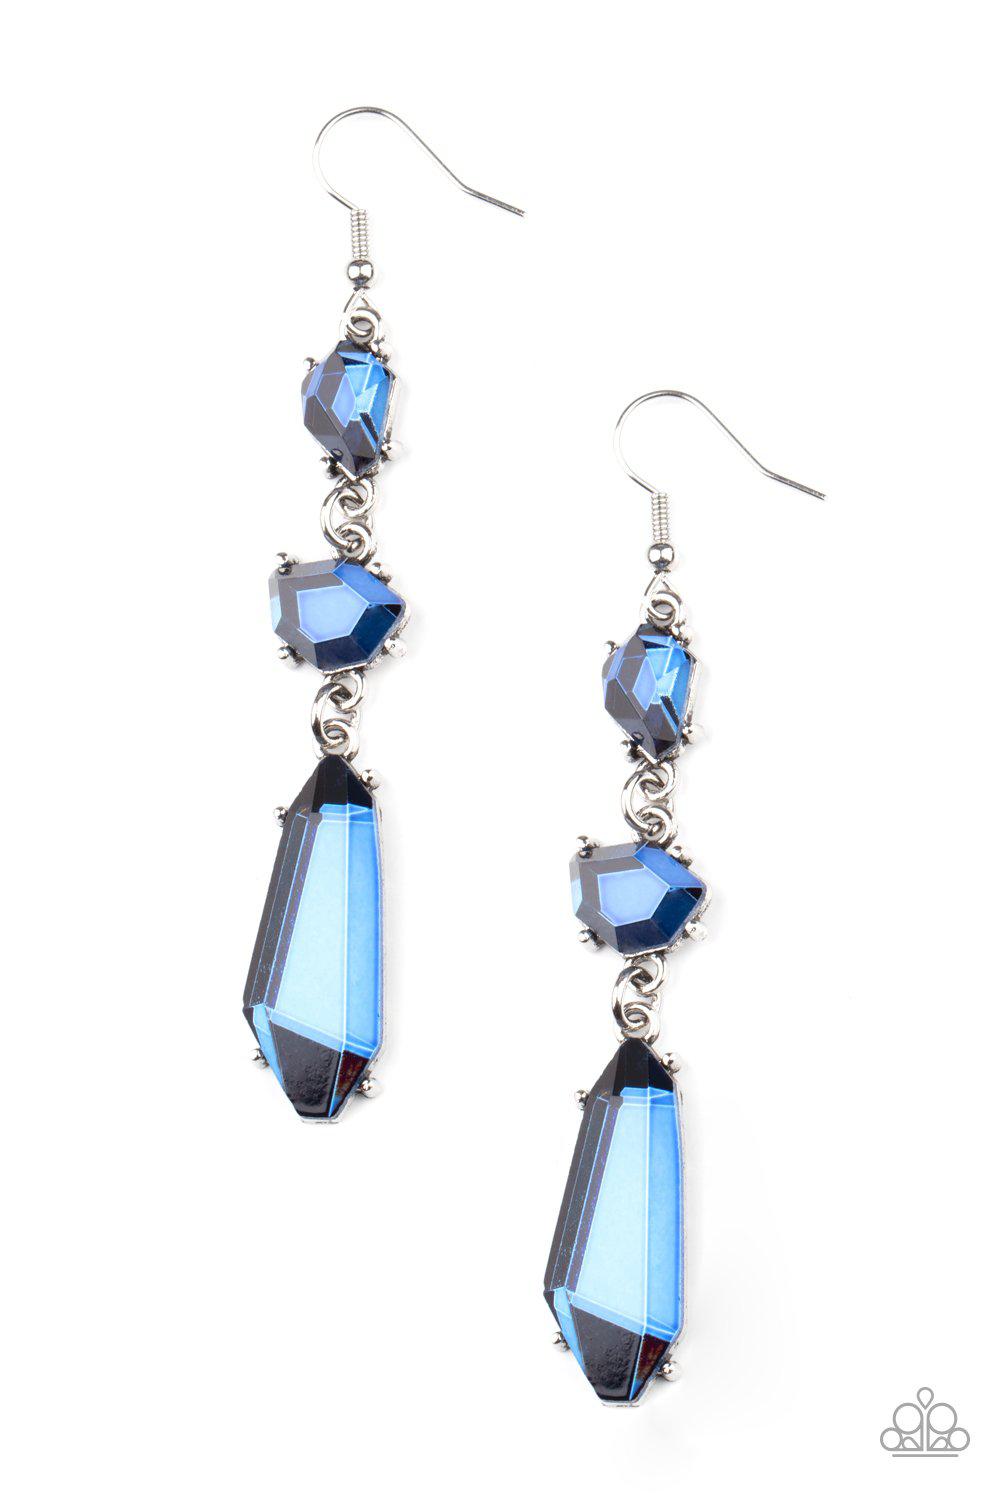 Sophisticated Smolder Blue Rhinestone Earrings - Paparazzi Accessories- lightbox - CarasShop.com - $5 Jewelry by Cara Jewels